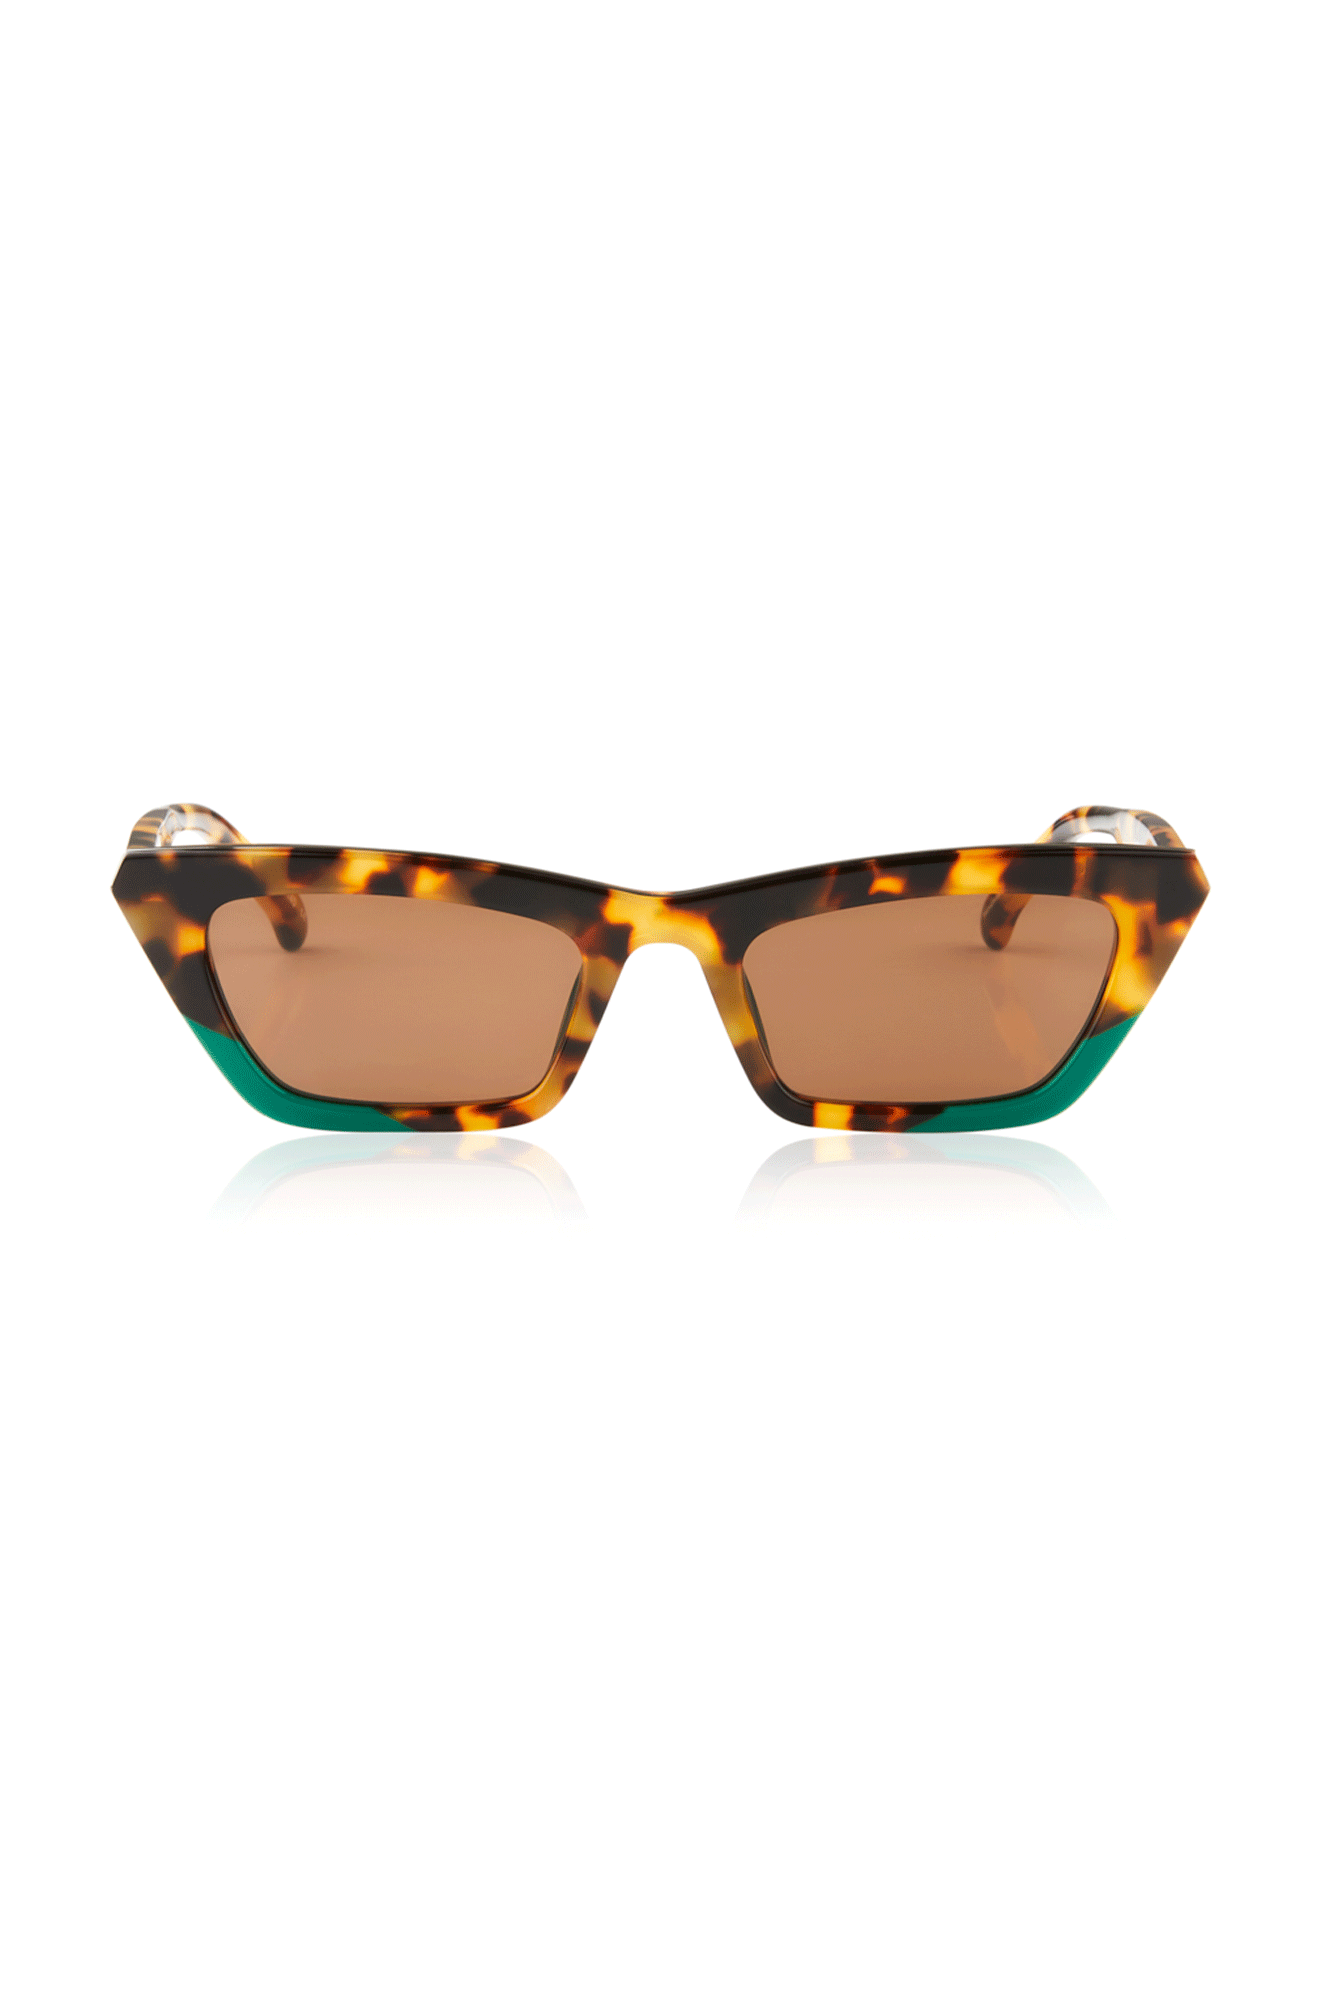 The FAE is a unique SS/22 style frame from the Oscar x Frank range. Featuring a 60’s cats eye design and modern bevelling, it is an elegant and stylish option for any wardrobe. Its green lamination and gold detailing make it a sophisticated choice, designed 100% in-house within the Oscar & Frank Design Lab.